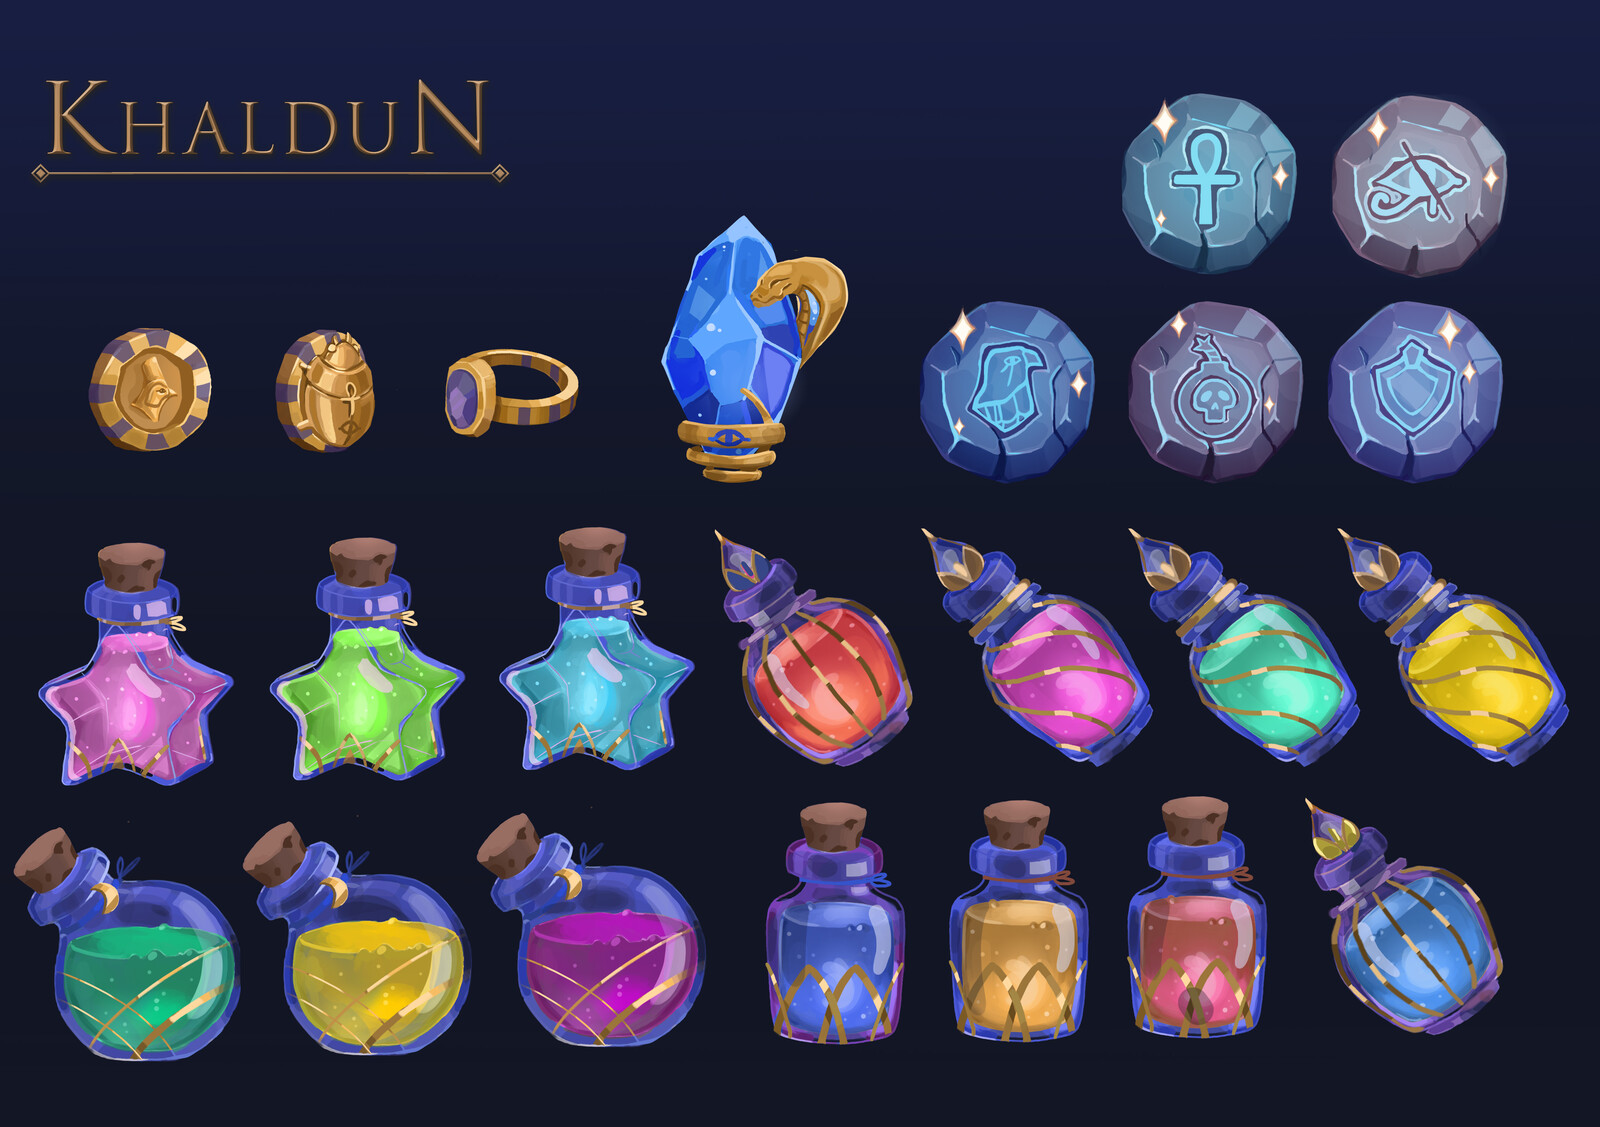 Skills, potions and currency designs